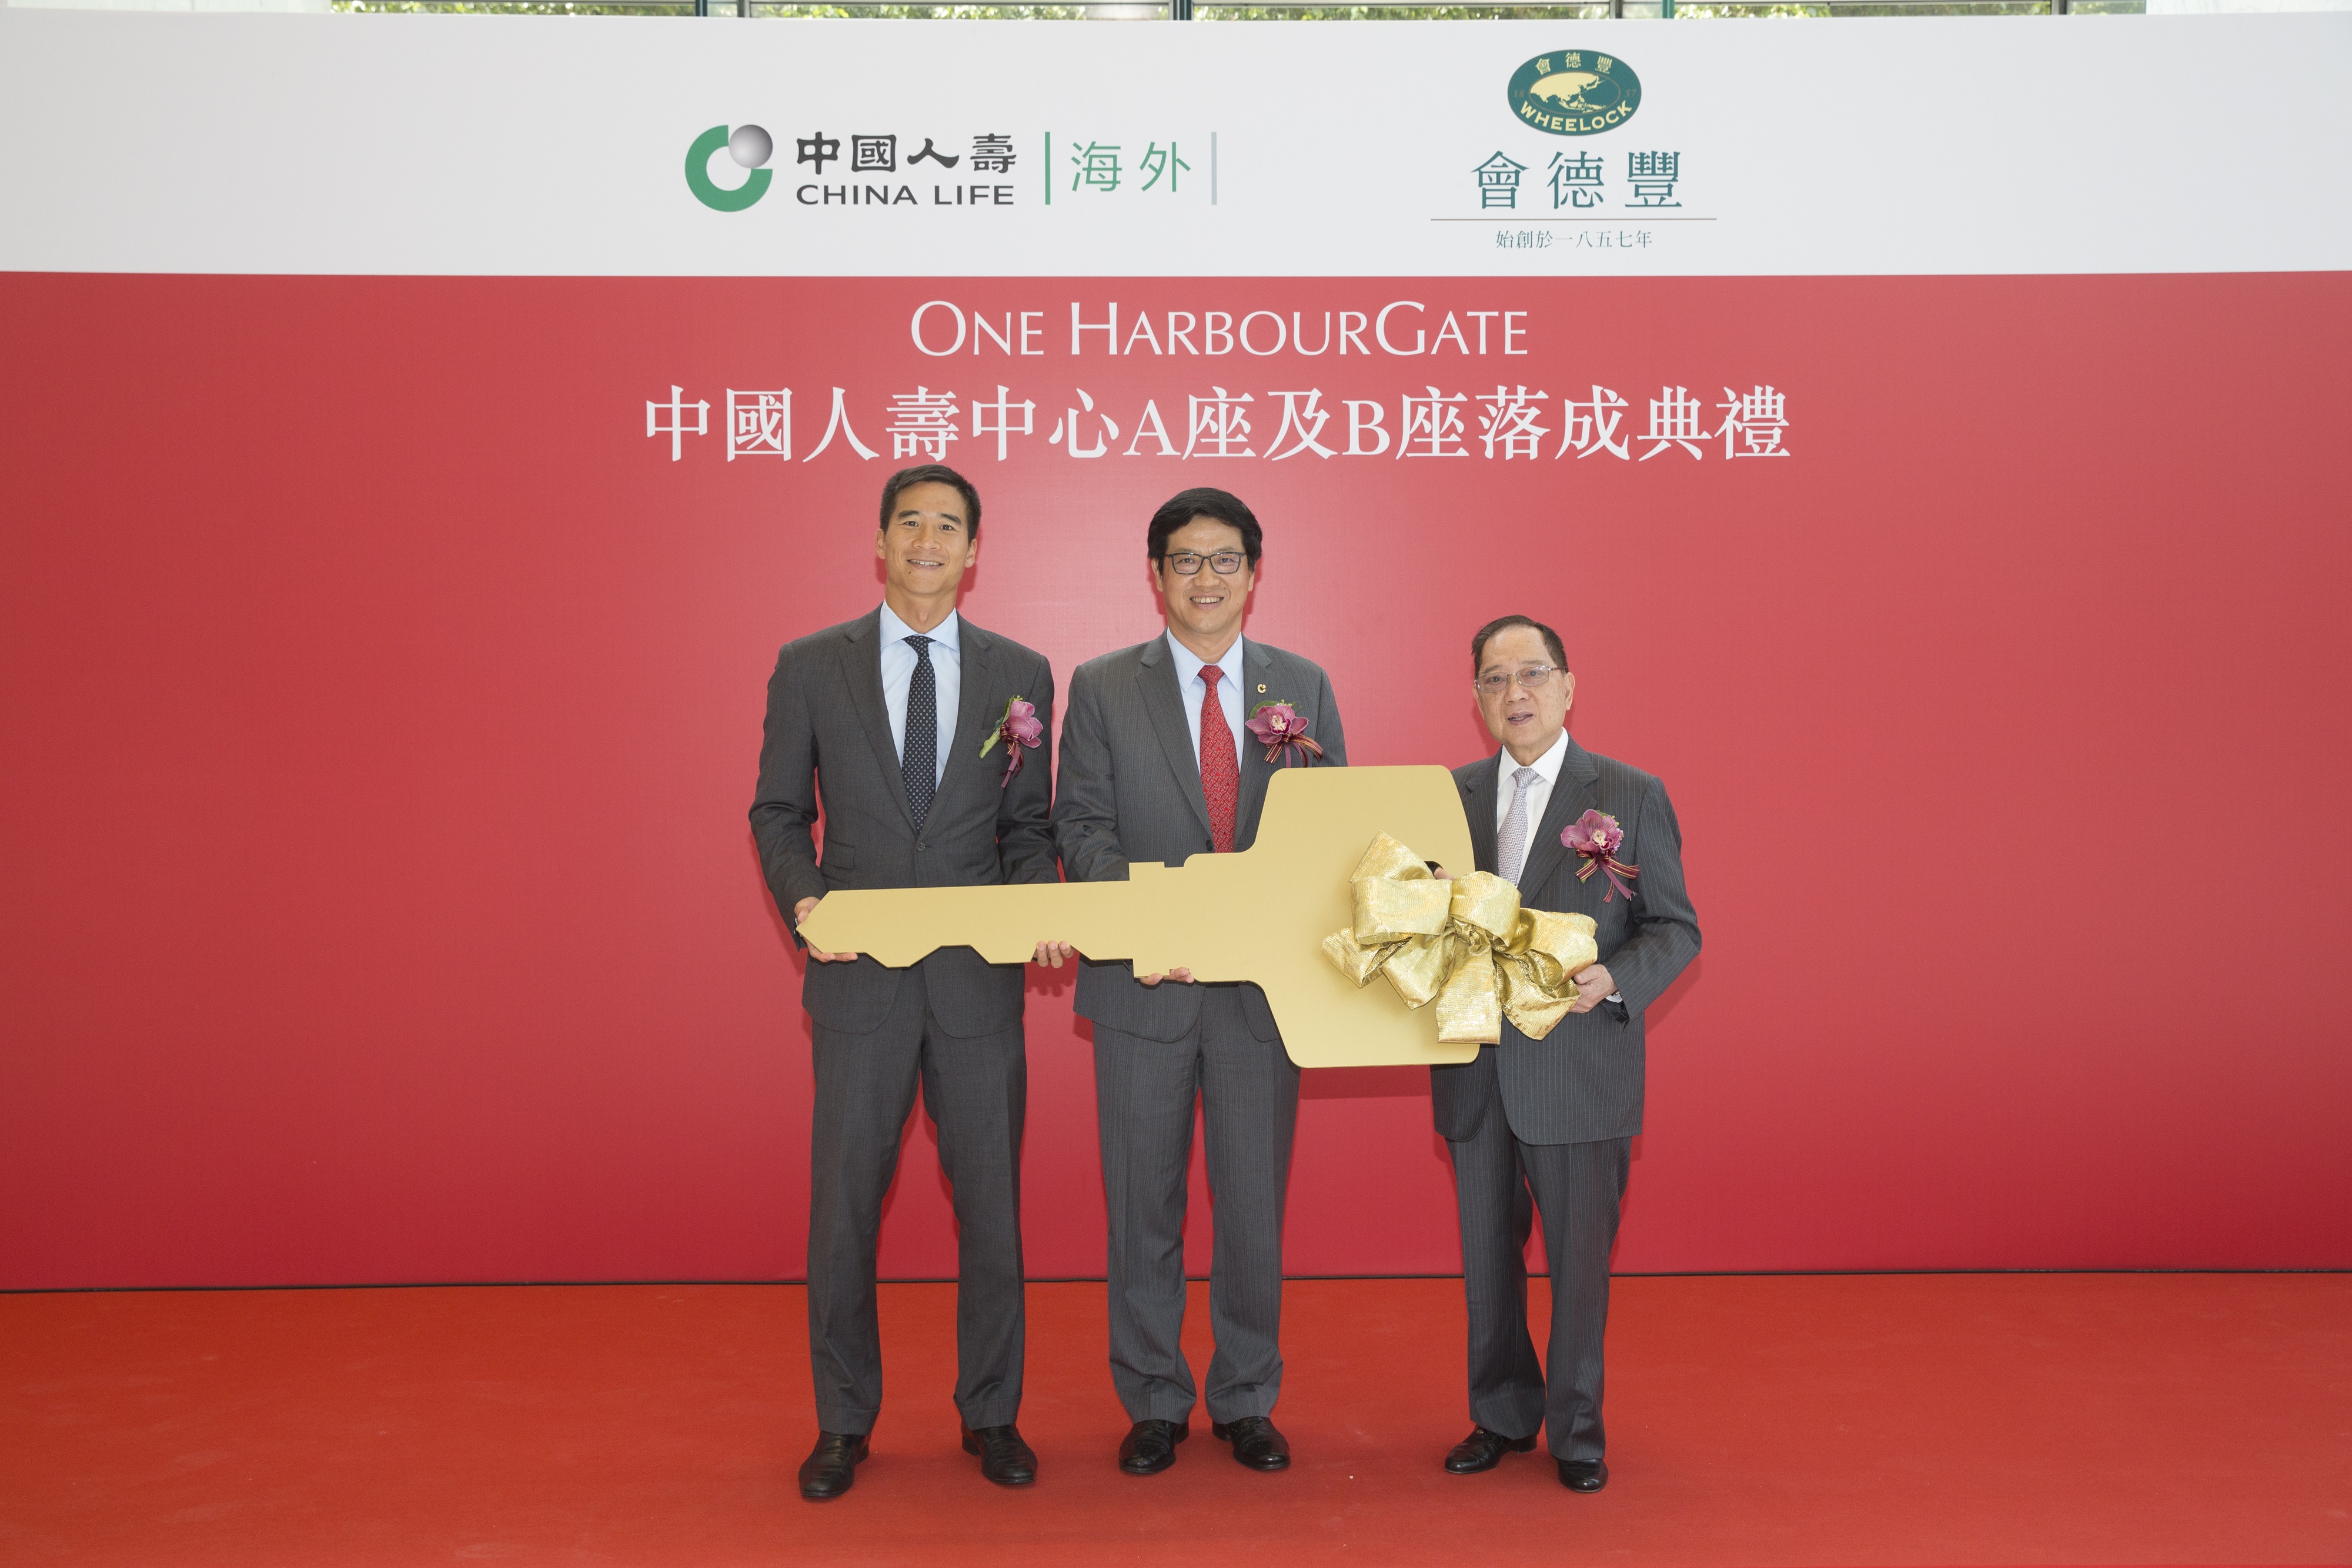 China Life Center (Previously named as One HarbourGate) Completed